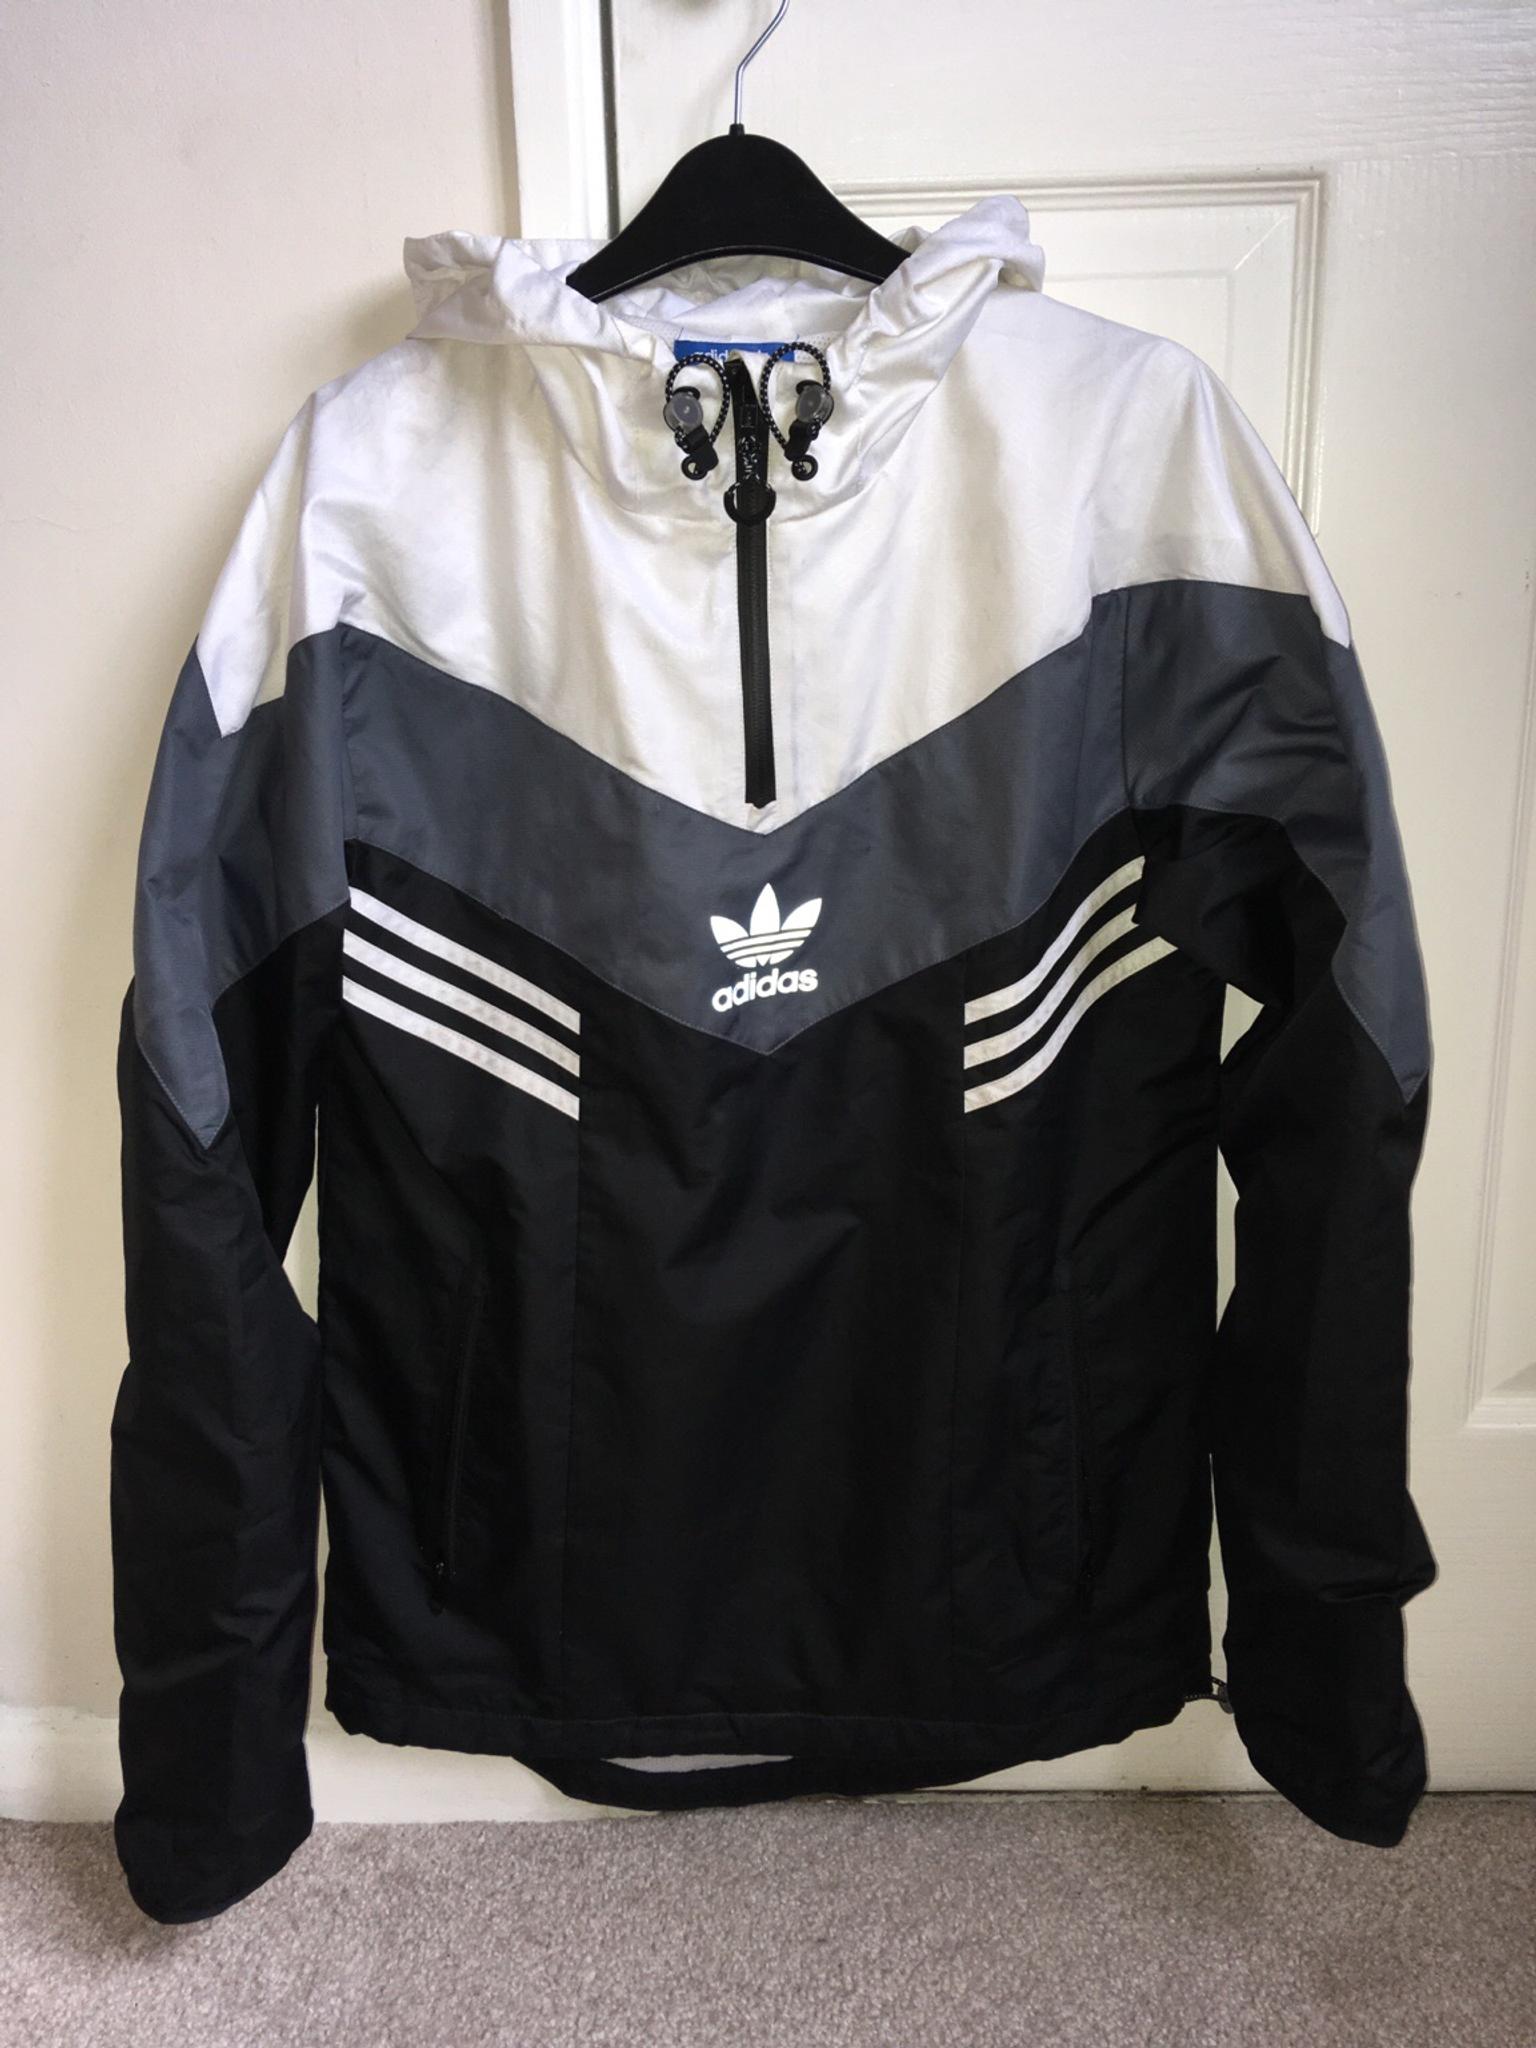 Adidas Reflective Windbreaker/Raincoat in SO16 Southampton for £20.00 for  sale | Shpock